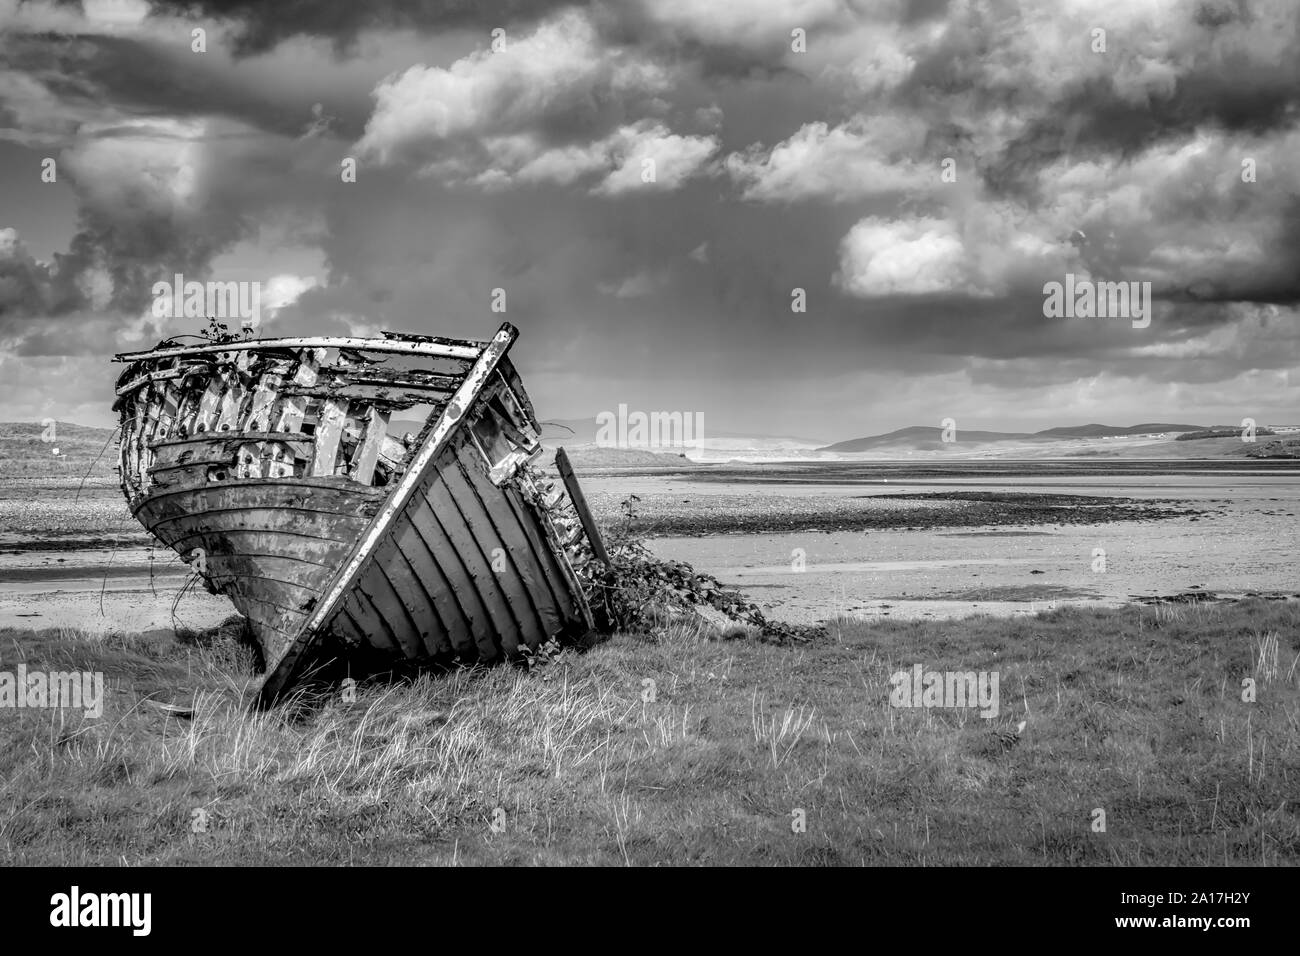 An old wooden Fishing boat decaying on a beach in Donegal Ireland Stock Photo